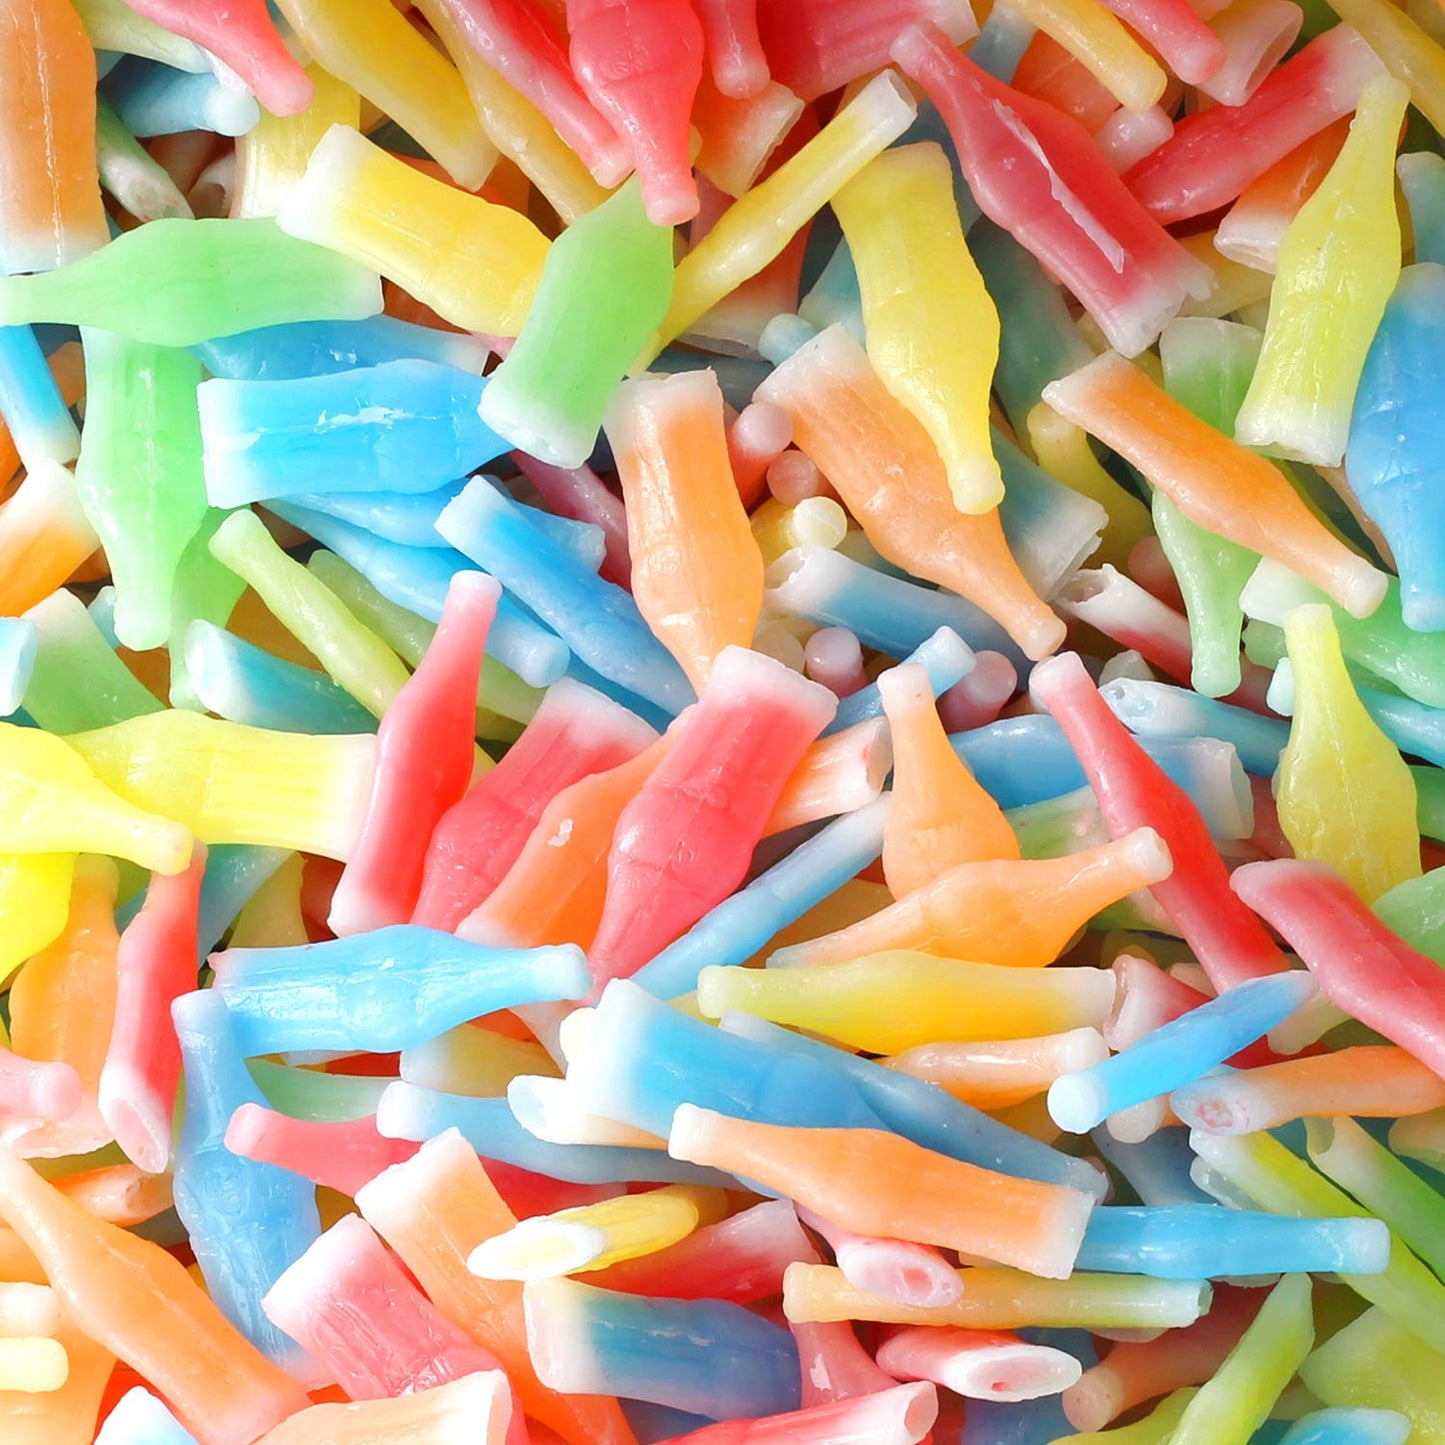 Wax Candy Bottle Drinks - Colorful Candy - Assorted Colors/Flavors - Bulk Candy - 4 LB - Great for Summer Barbeques, Pool Parties, Fourth of July